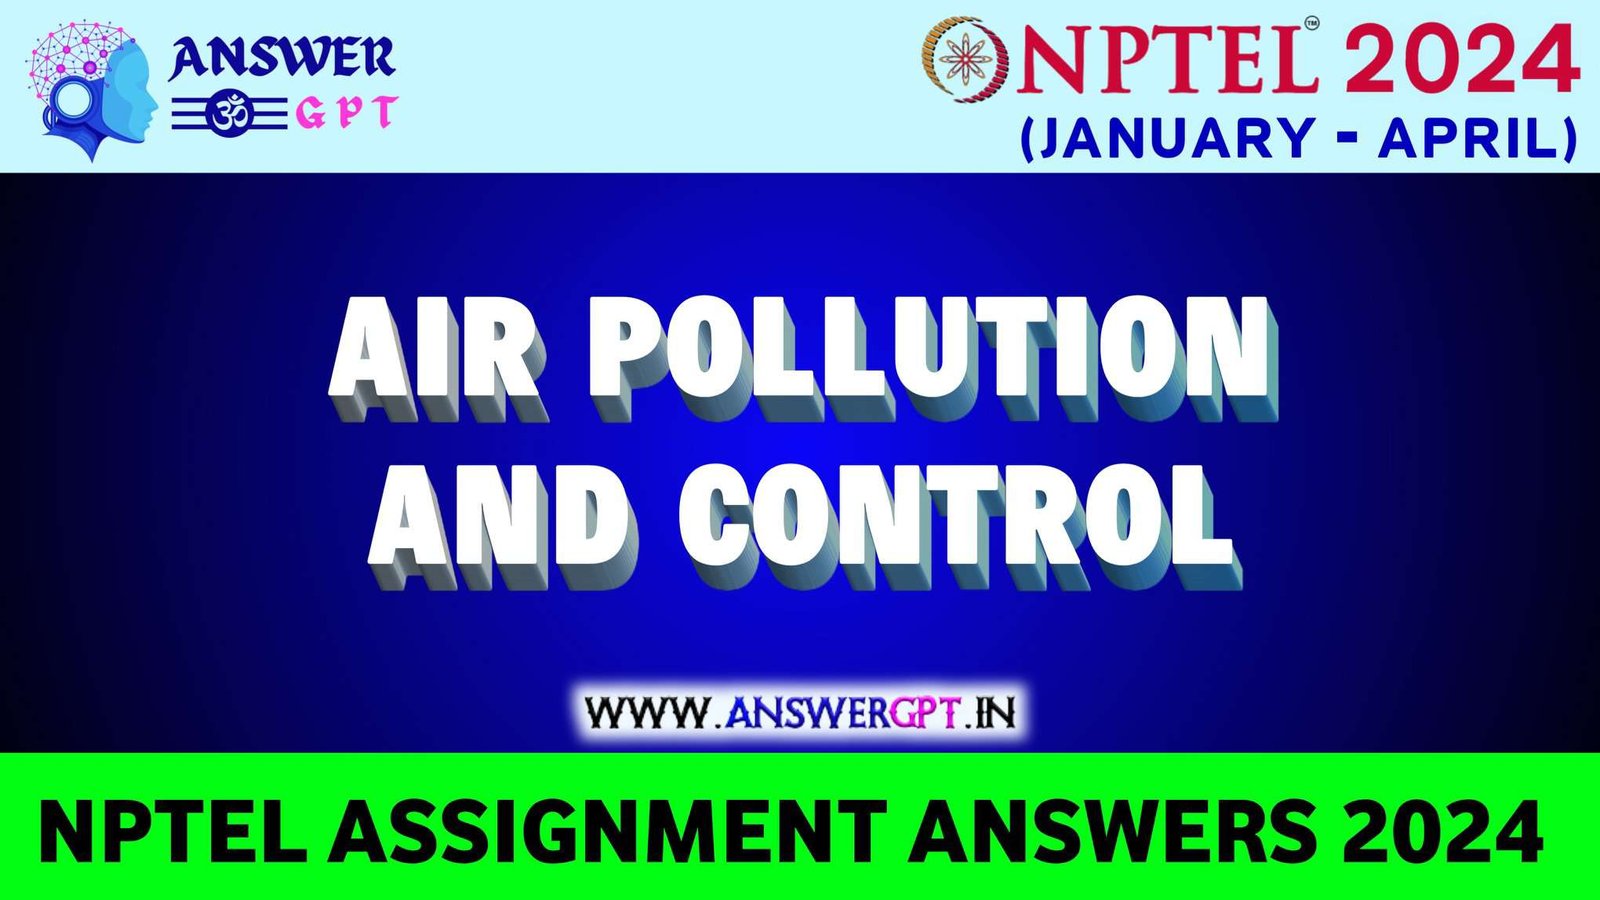 nptel air pollution and control week 2 assignment answers